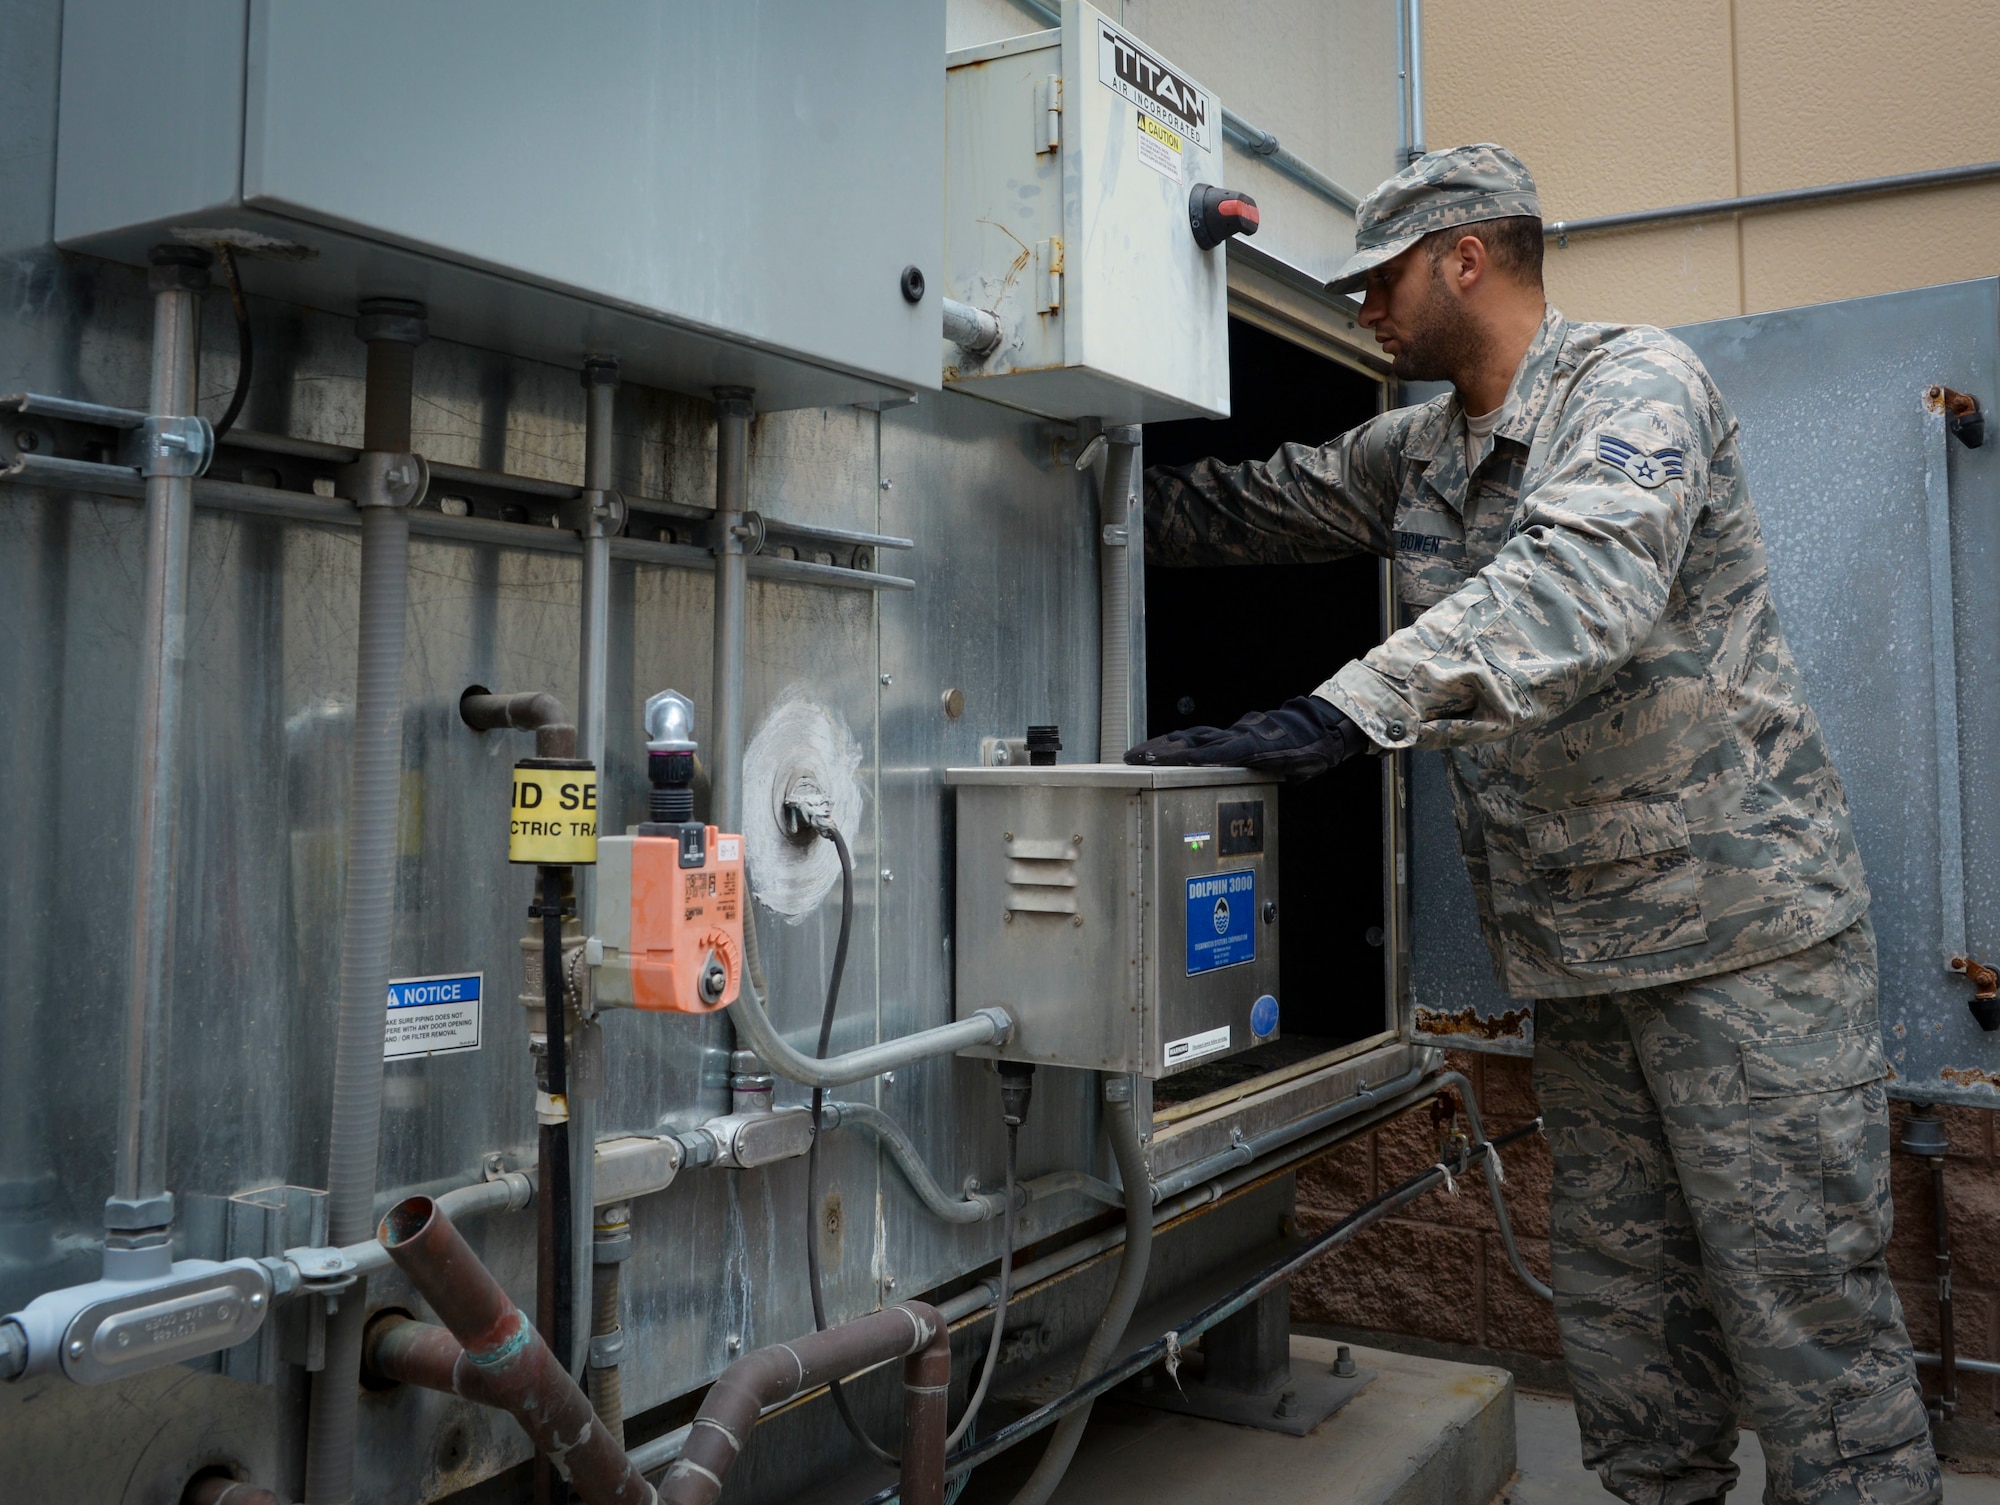 Senior Airman Matthew Bowen, Heating, Ventilation, Air Conditioning/Refrigeration and Control technician assigned to the 99th Civil Engineer Squadron, inspects an HVAC unit at a 57th maintenance facility on Nellis Air Force Base. The specific internal temperatures needed in every facility across the base are imperative for the functionality of the equipment and personnel. (U.S. Air Force photo by Airman Bailee A. Darbasie)